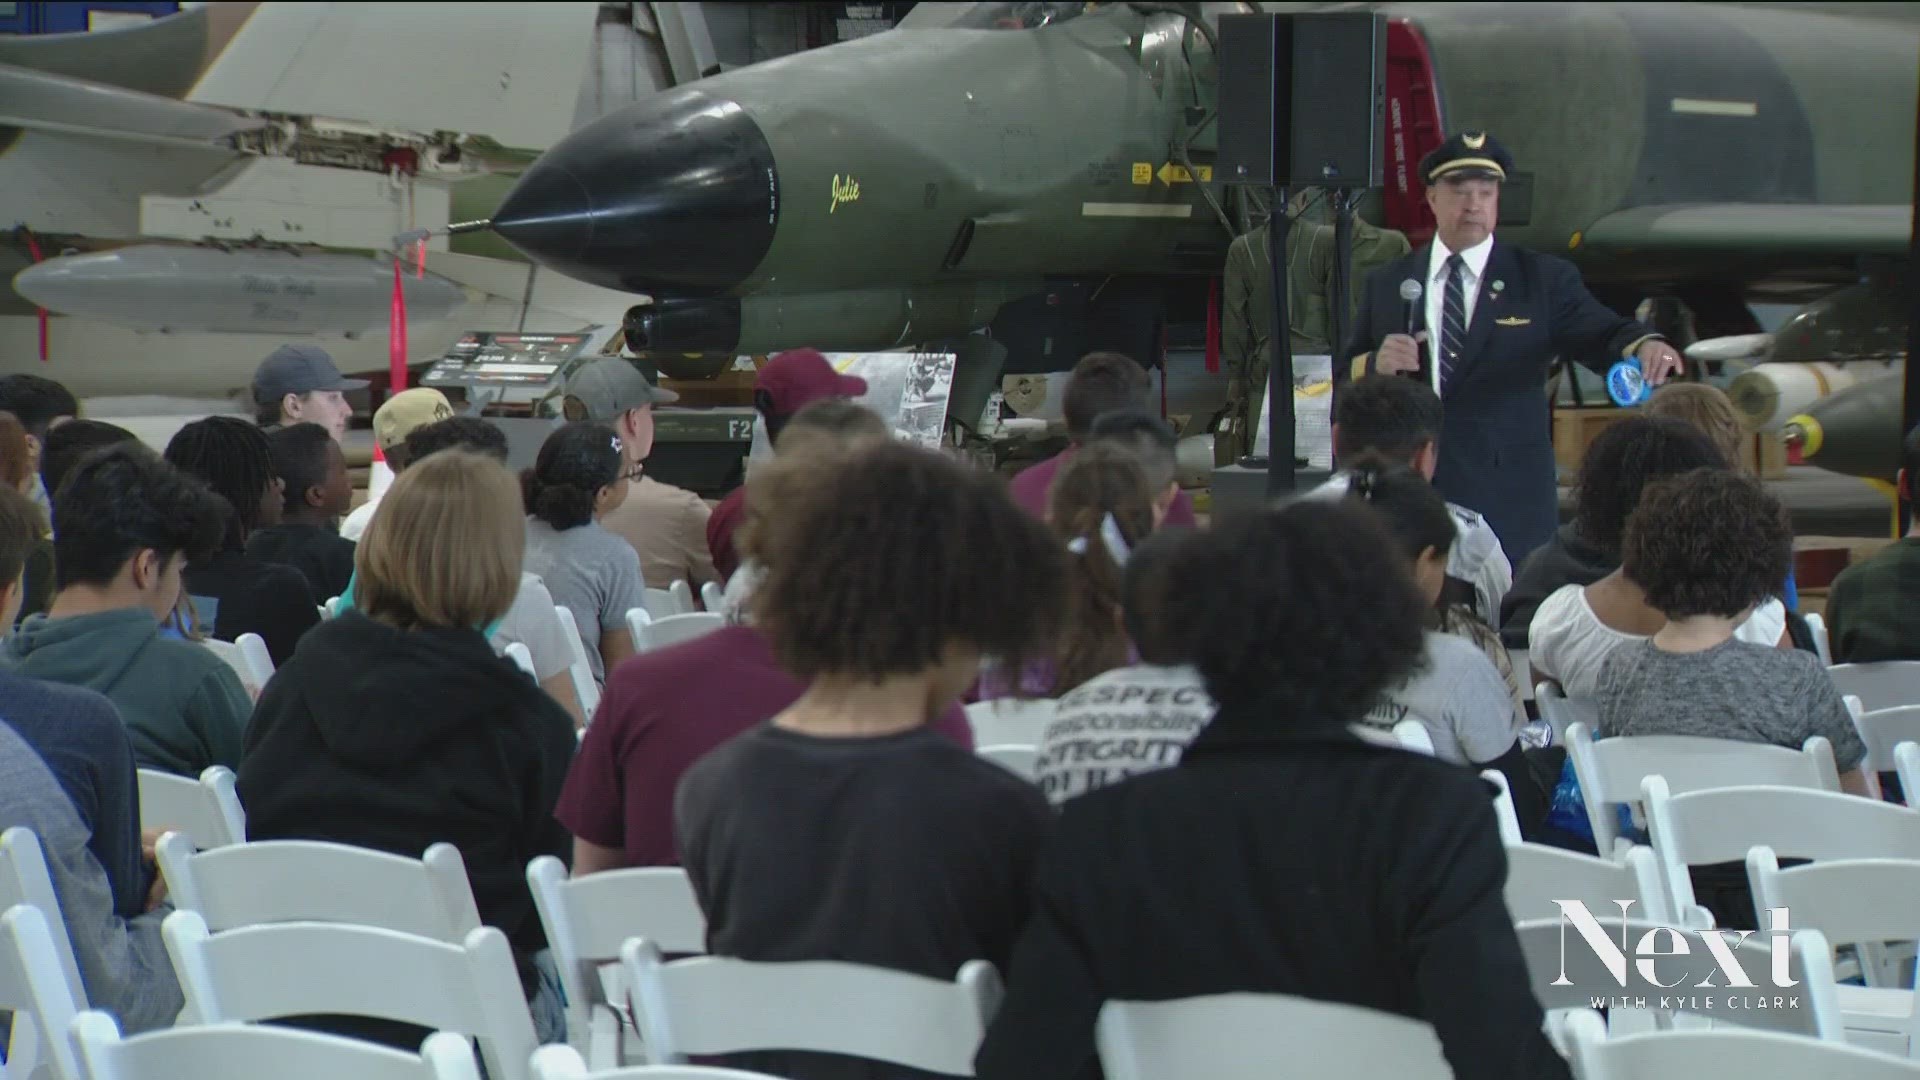 Shades of Blue hosted a symposium at the Wings of the Rockies Museum that allowed students, particularly minority students, to learn about the aviation industry.